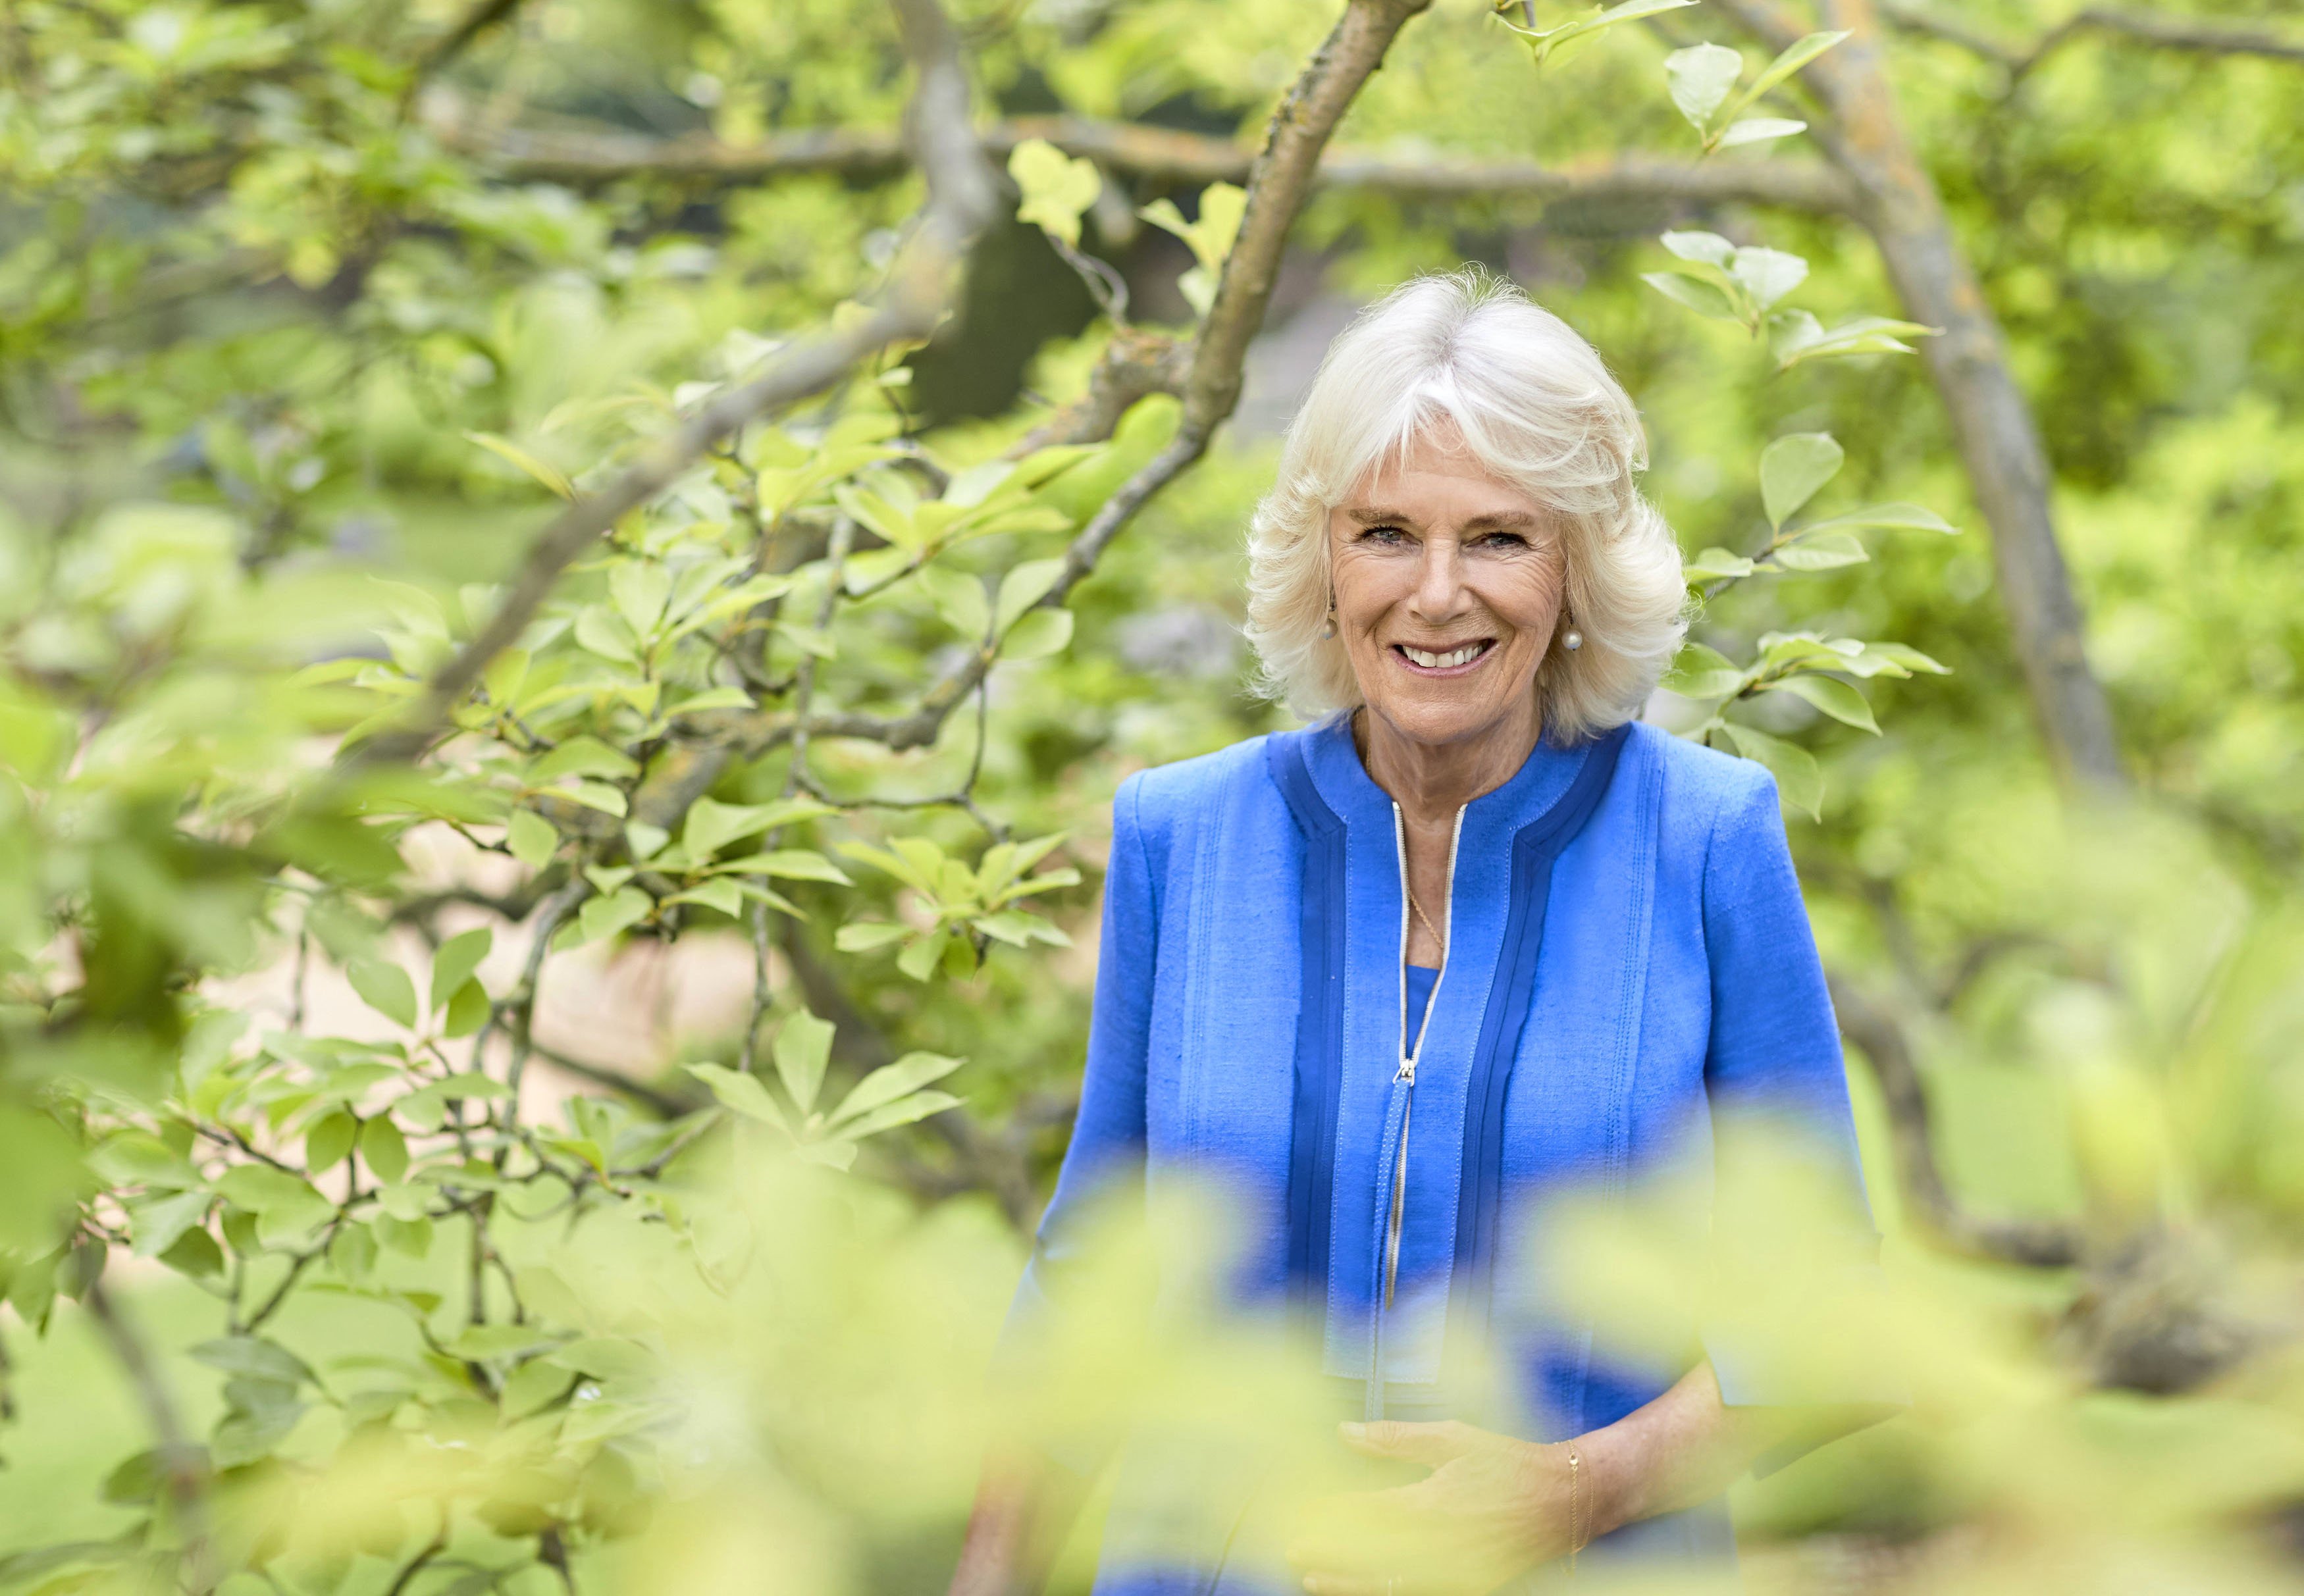 Camilla, Duchess of Cornwall poses for an official portrait in the gardens of Clarence House to mark HRH's 73rd birthday, wearing a blue silk linen on July 17, 2020. Photo: Getty Images